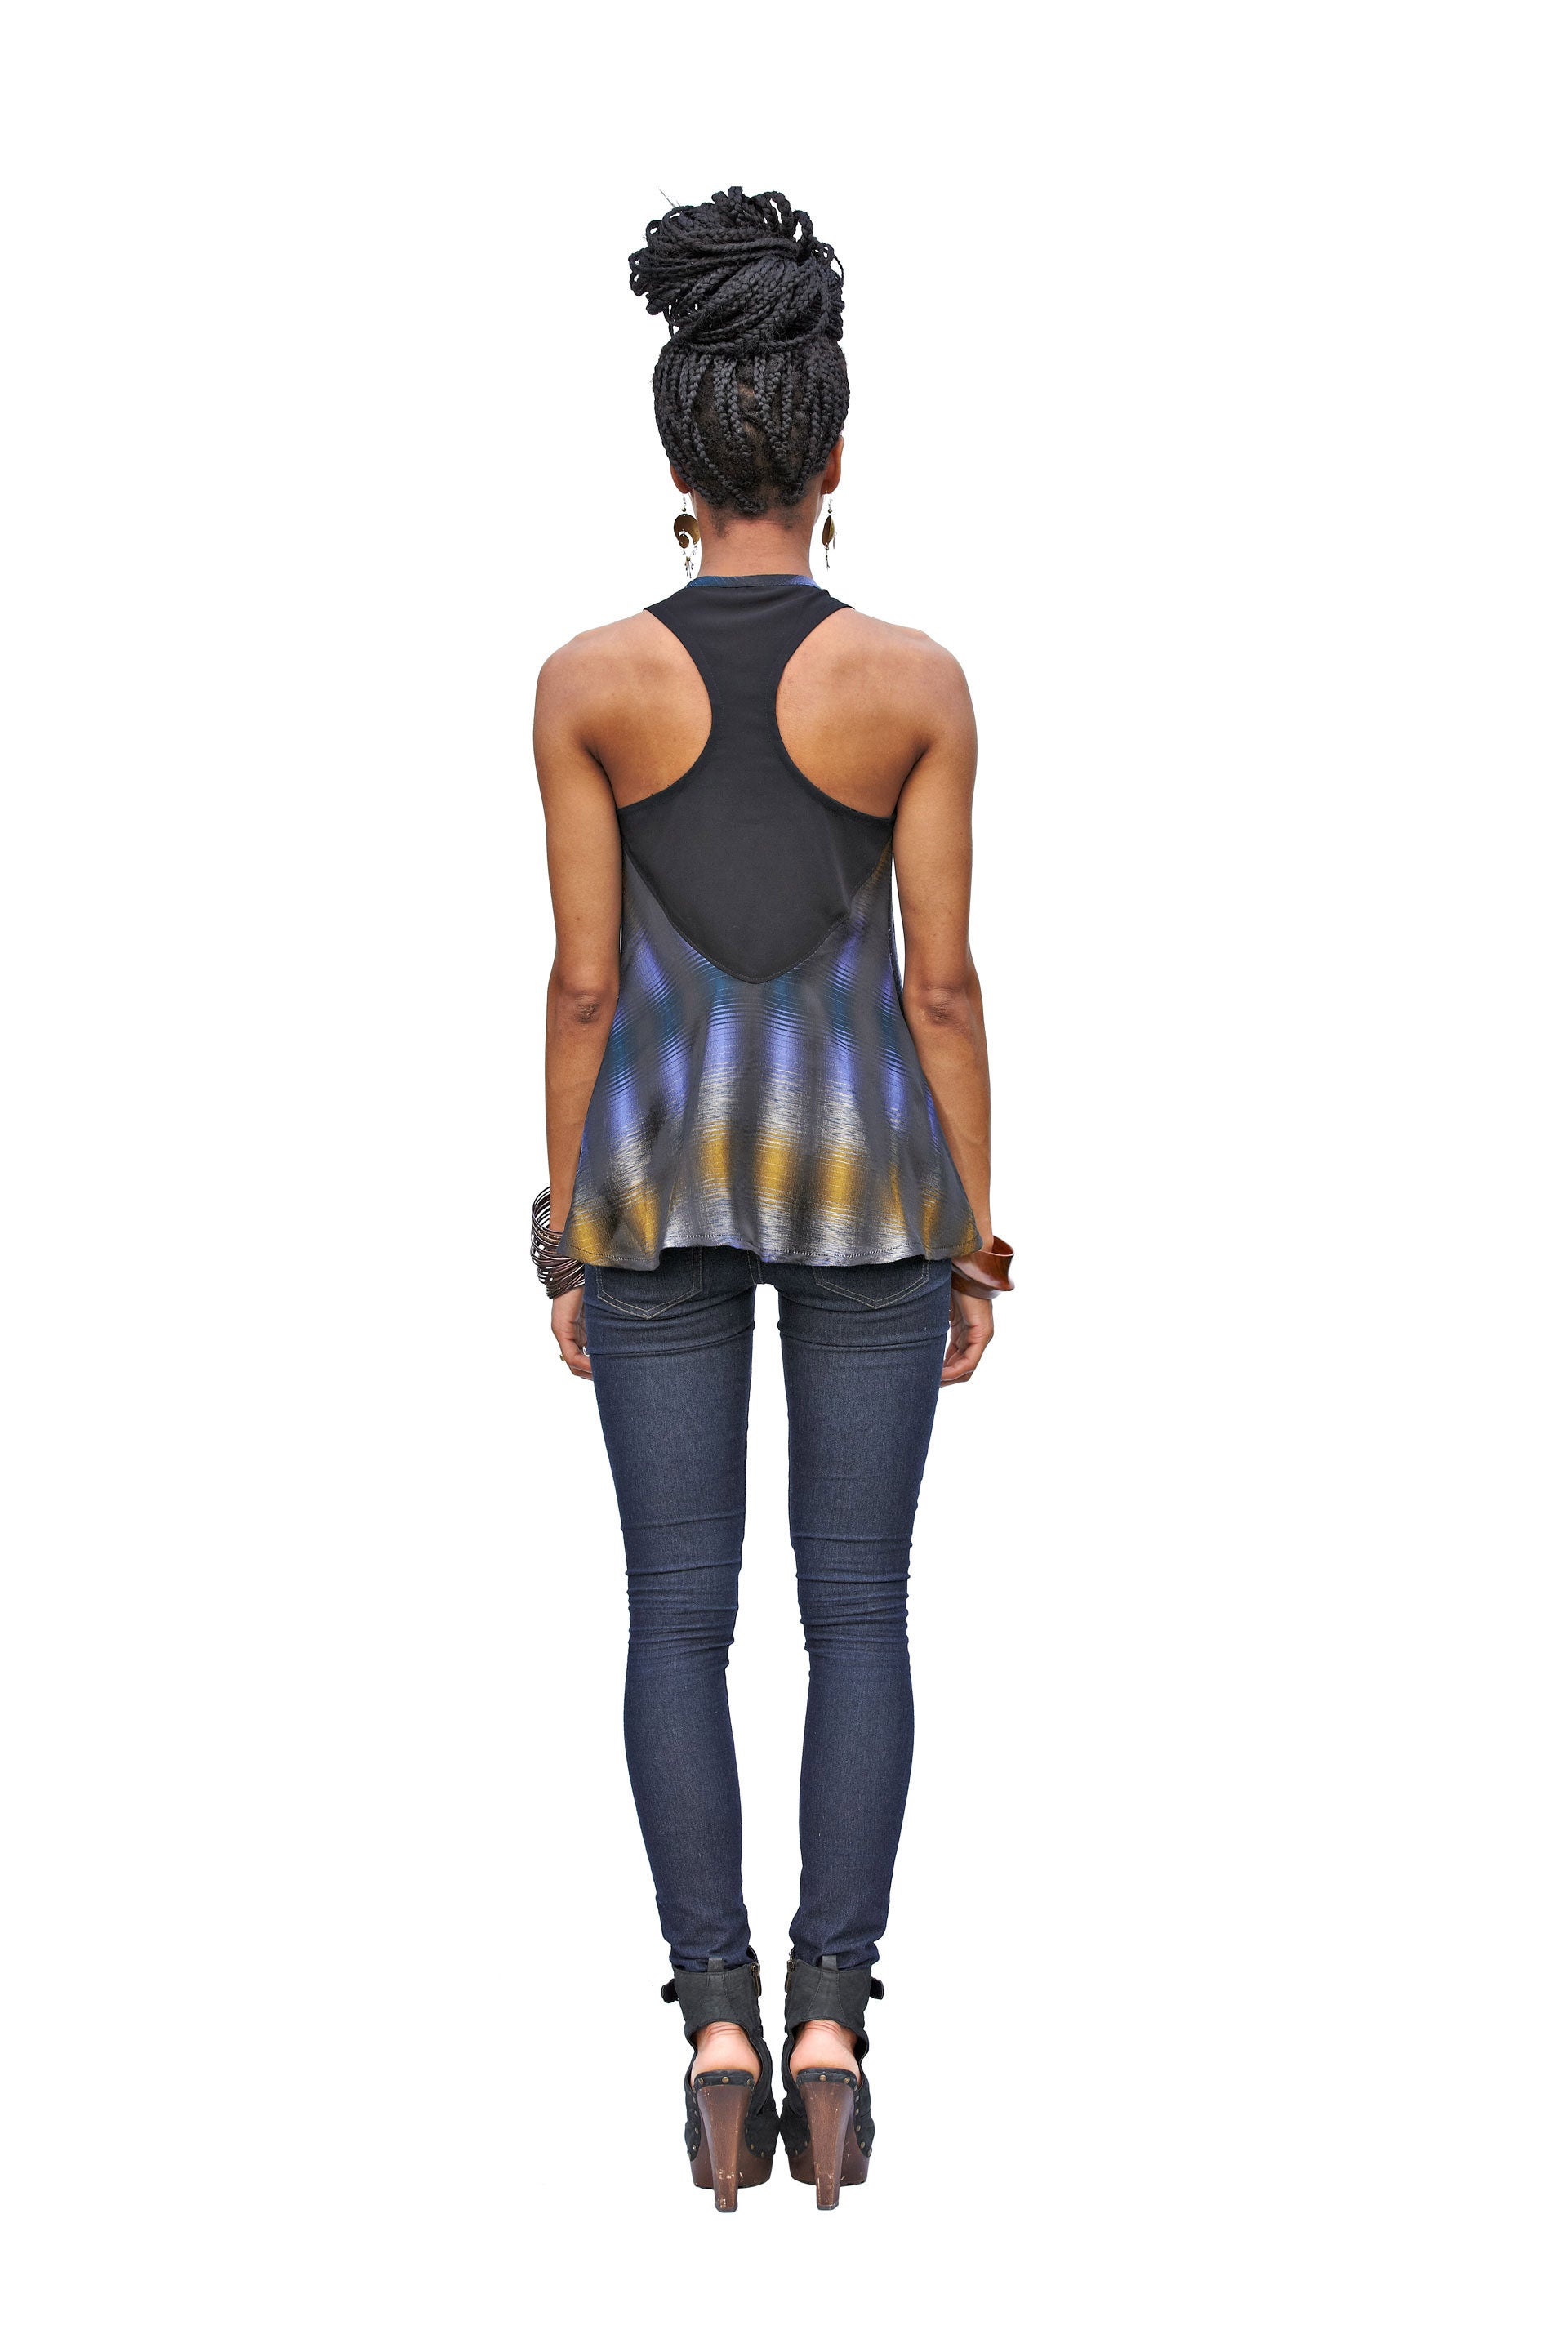 Simone Dress and Tank Top - Paper - Victory Patterns